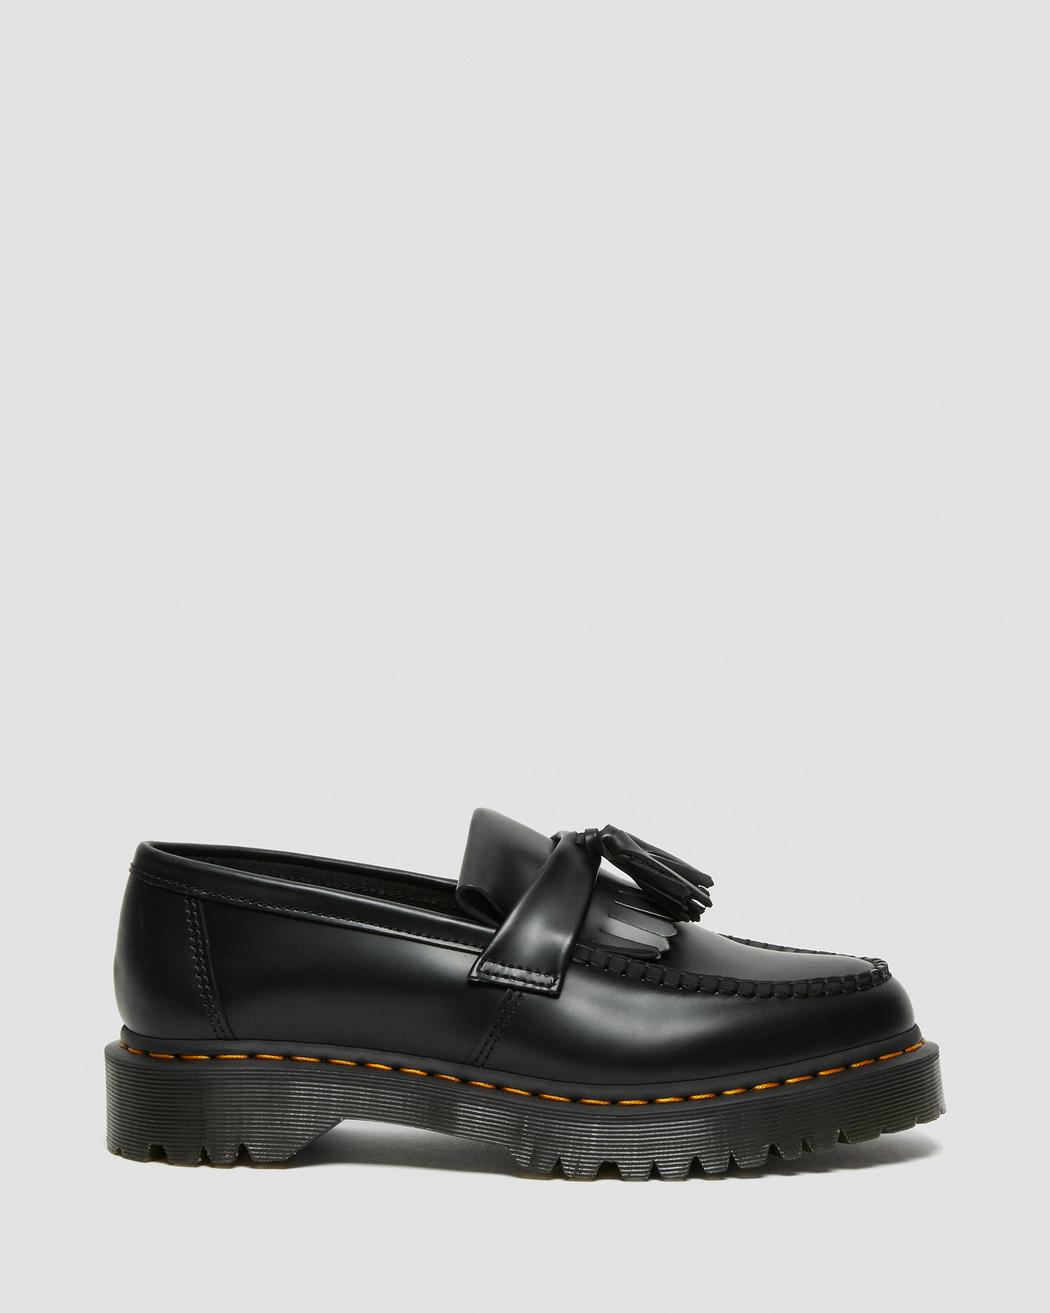 ADRIAN BEX SMOOTH LEATHER TASSEL LOAFERS